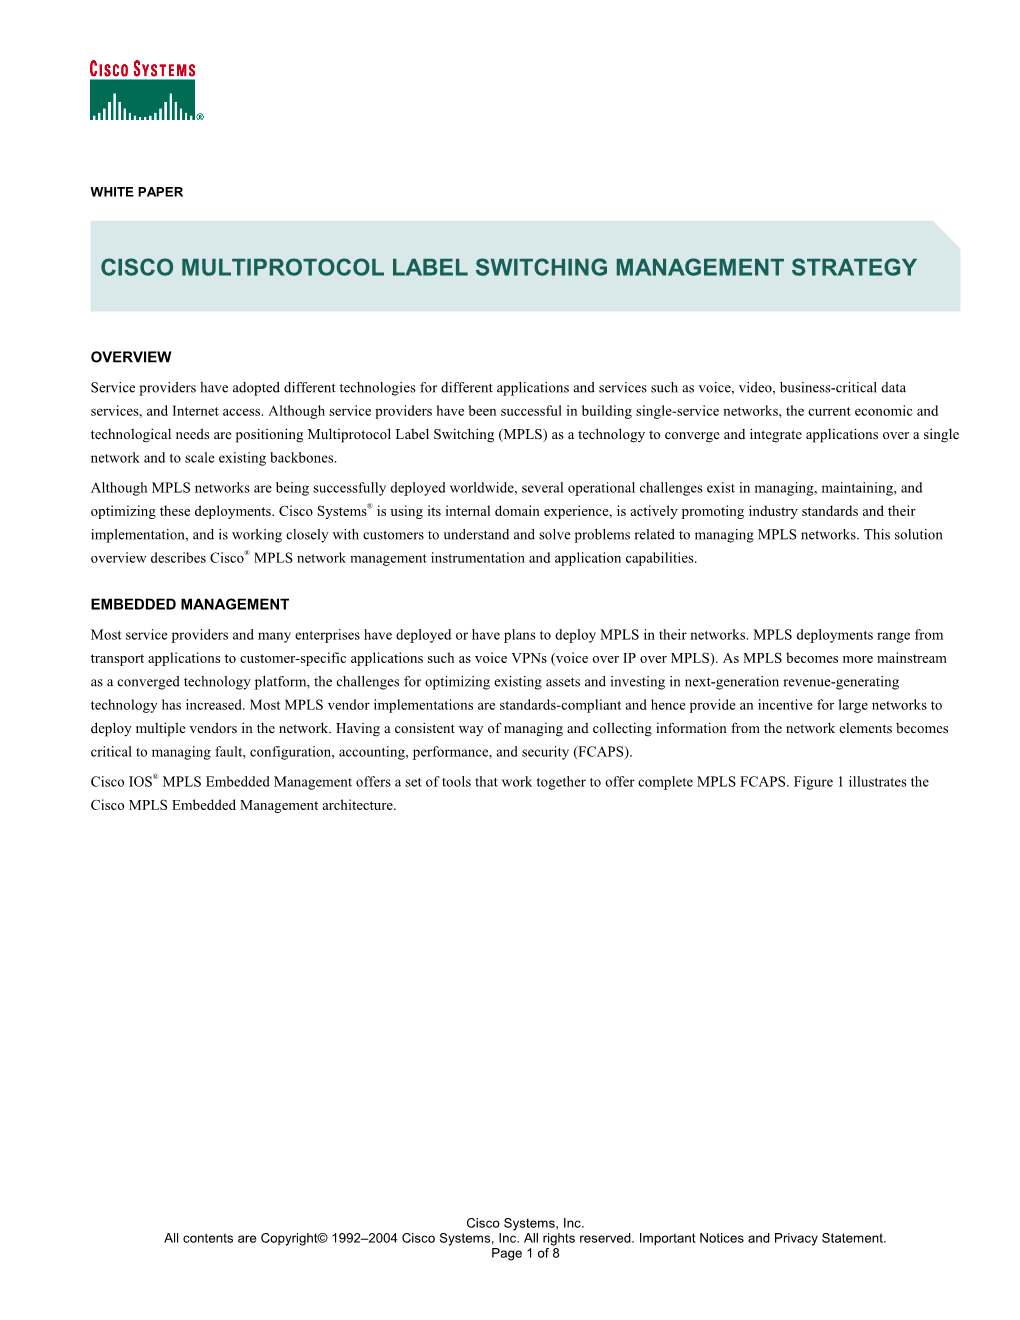 Cisco Multiprotocol Label Switching Management Strategy